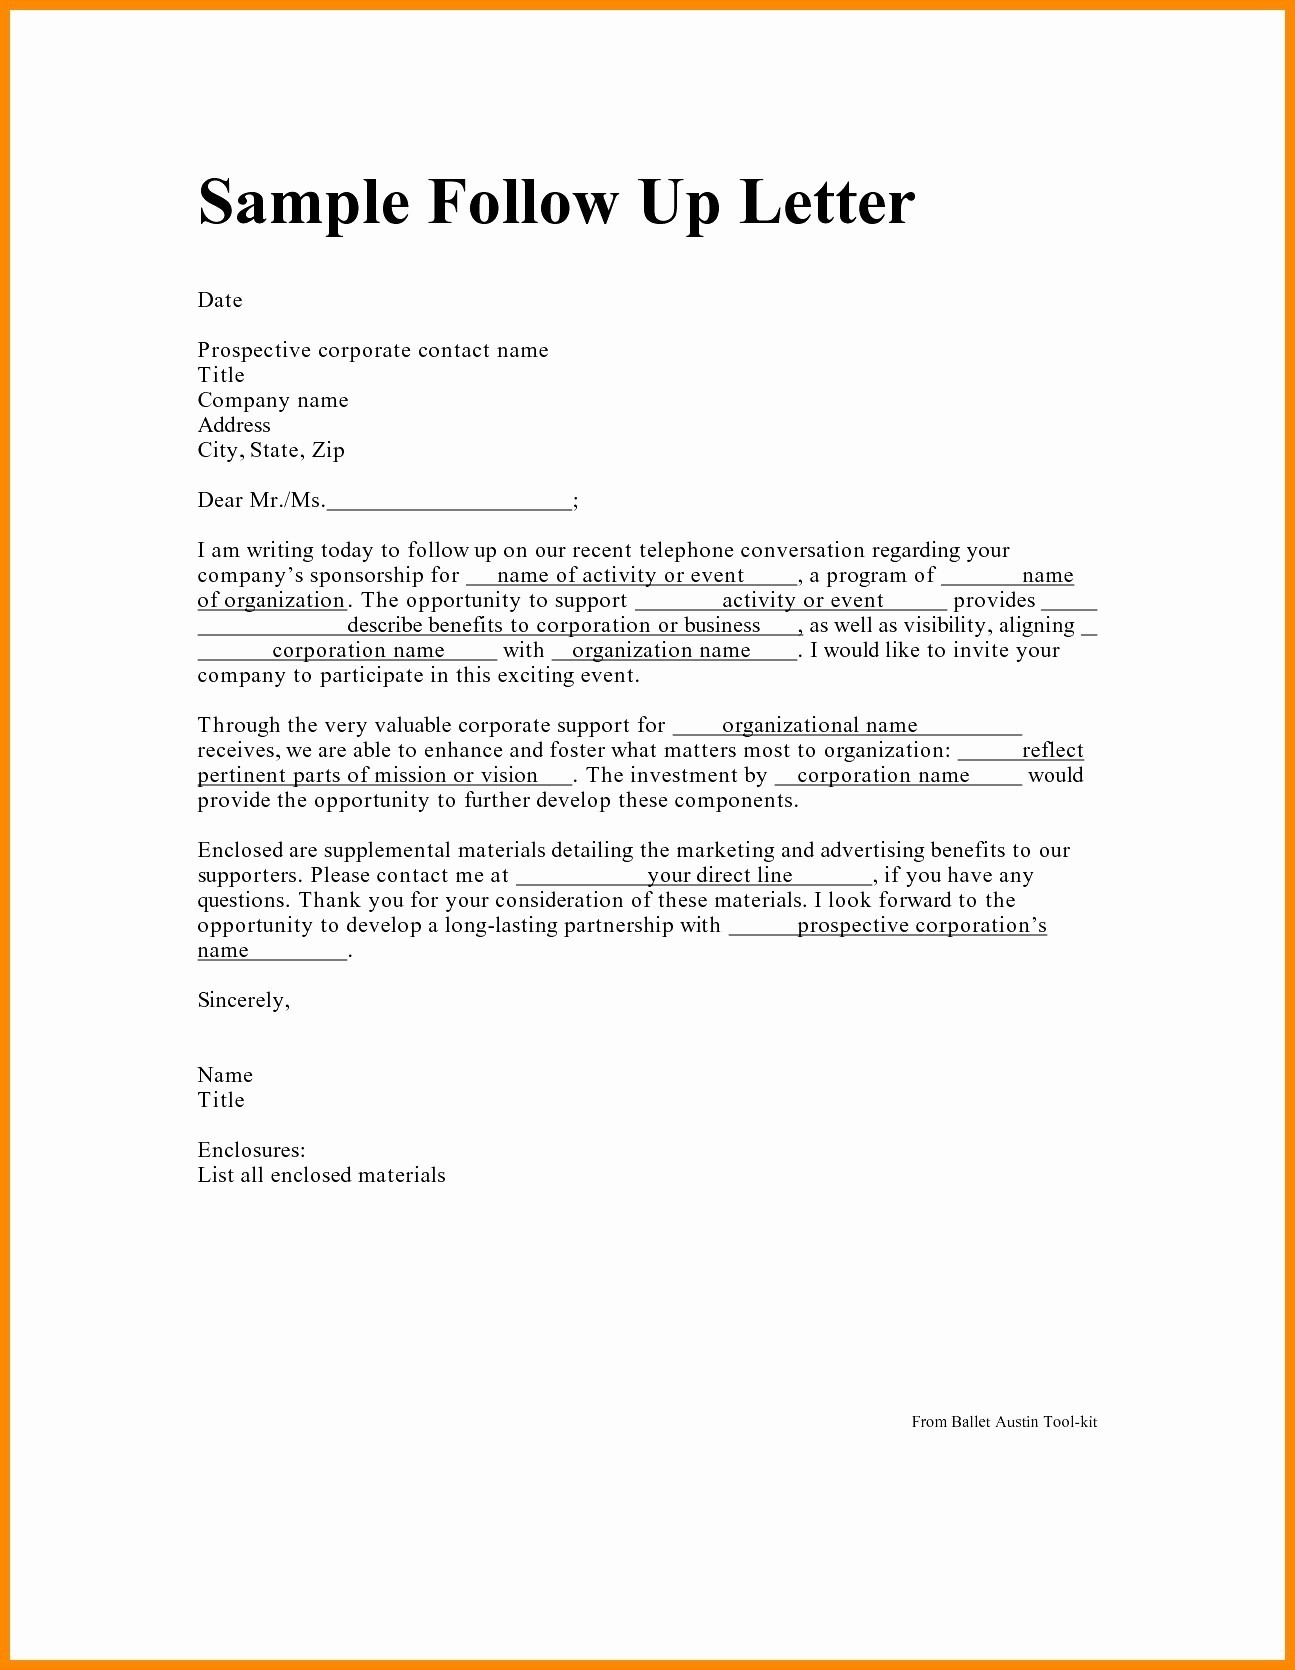 Sample Letters For Meeting Request With A Client Valid 50 New Document